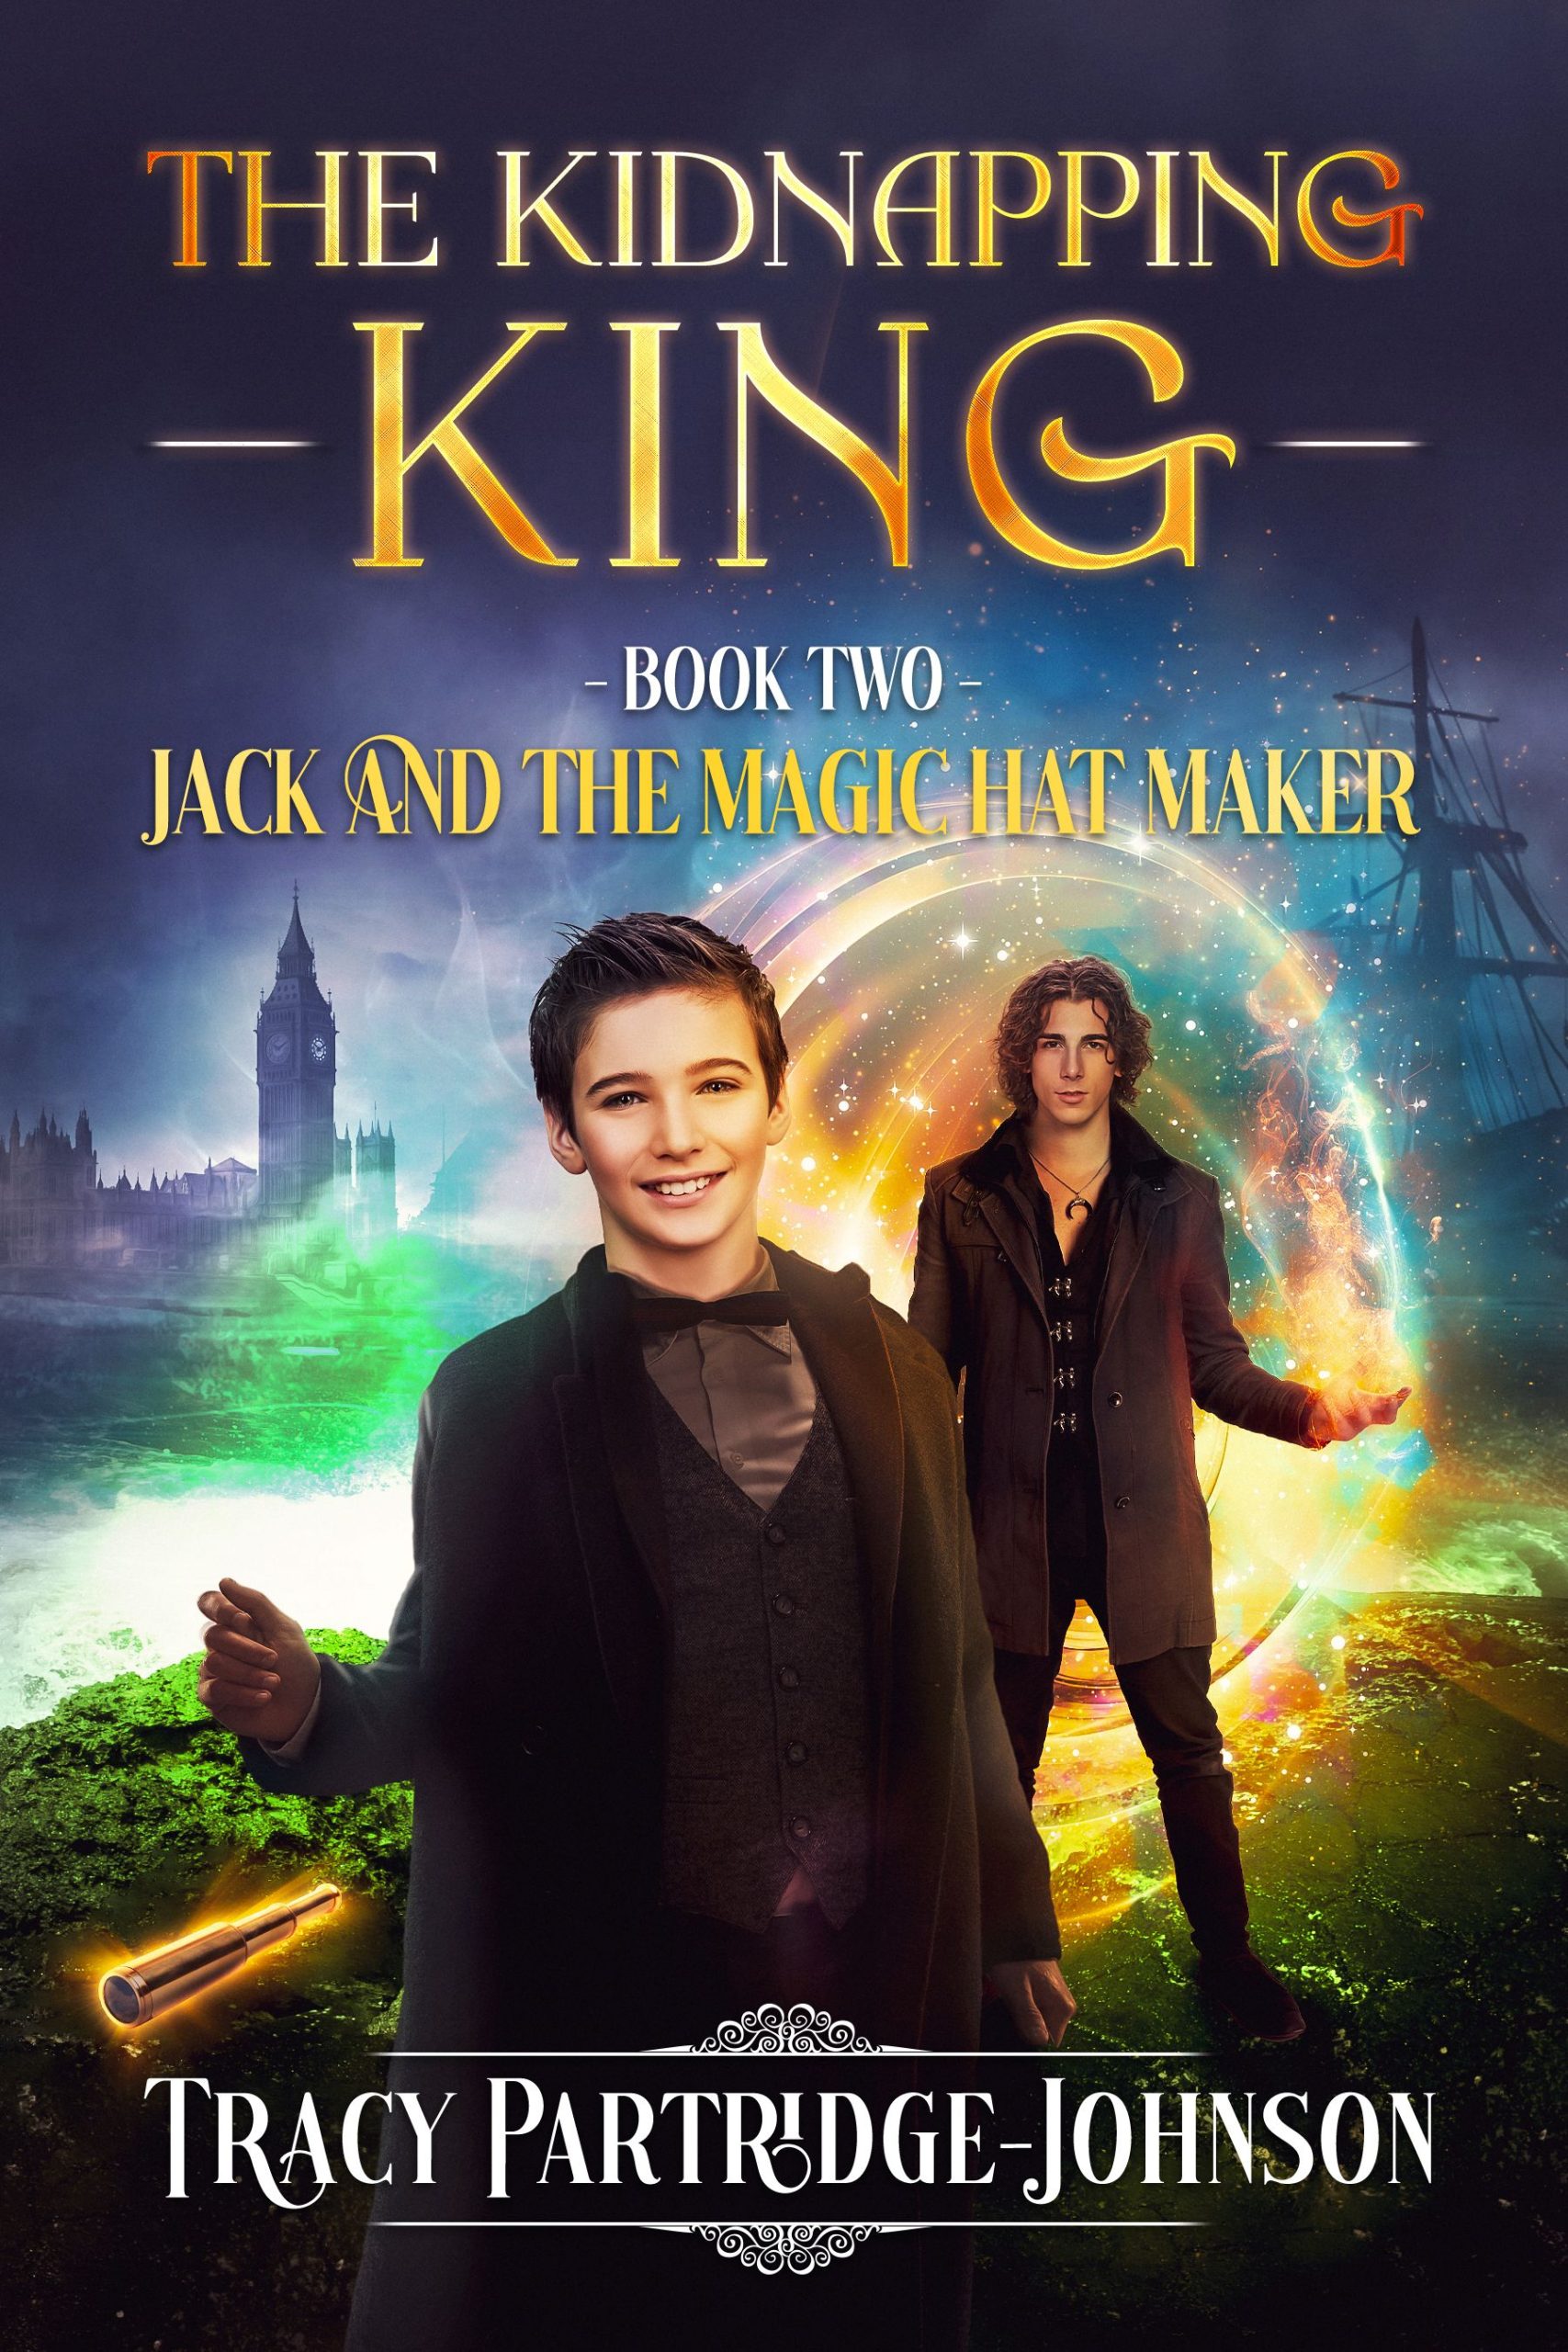 BOOK TWO - THE KIDNAPPING KING